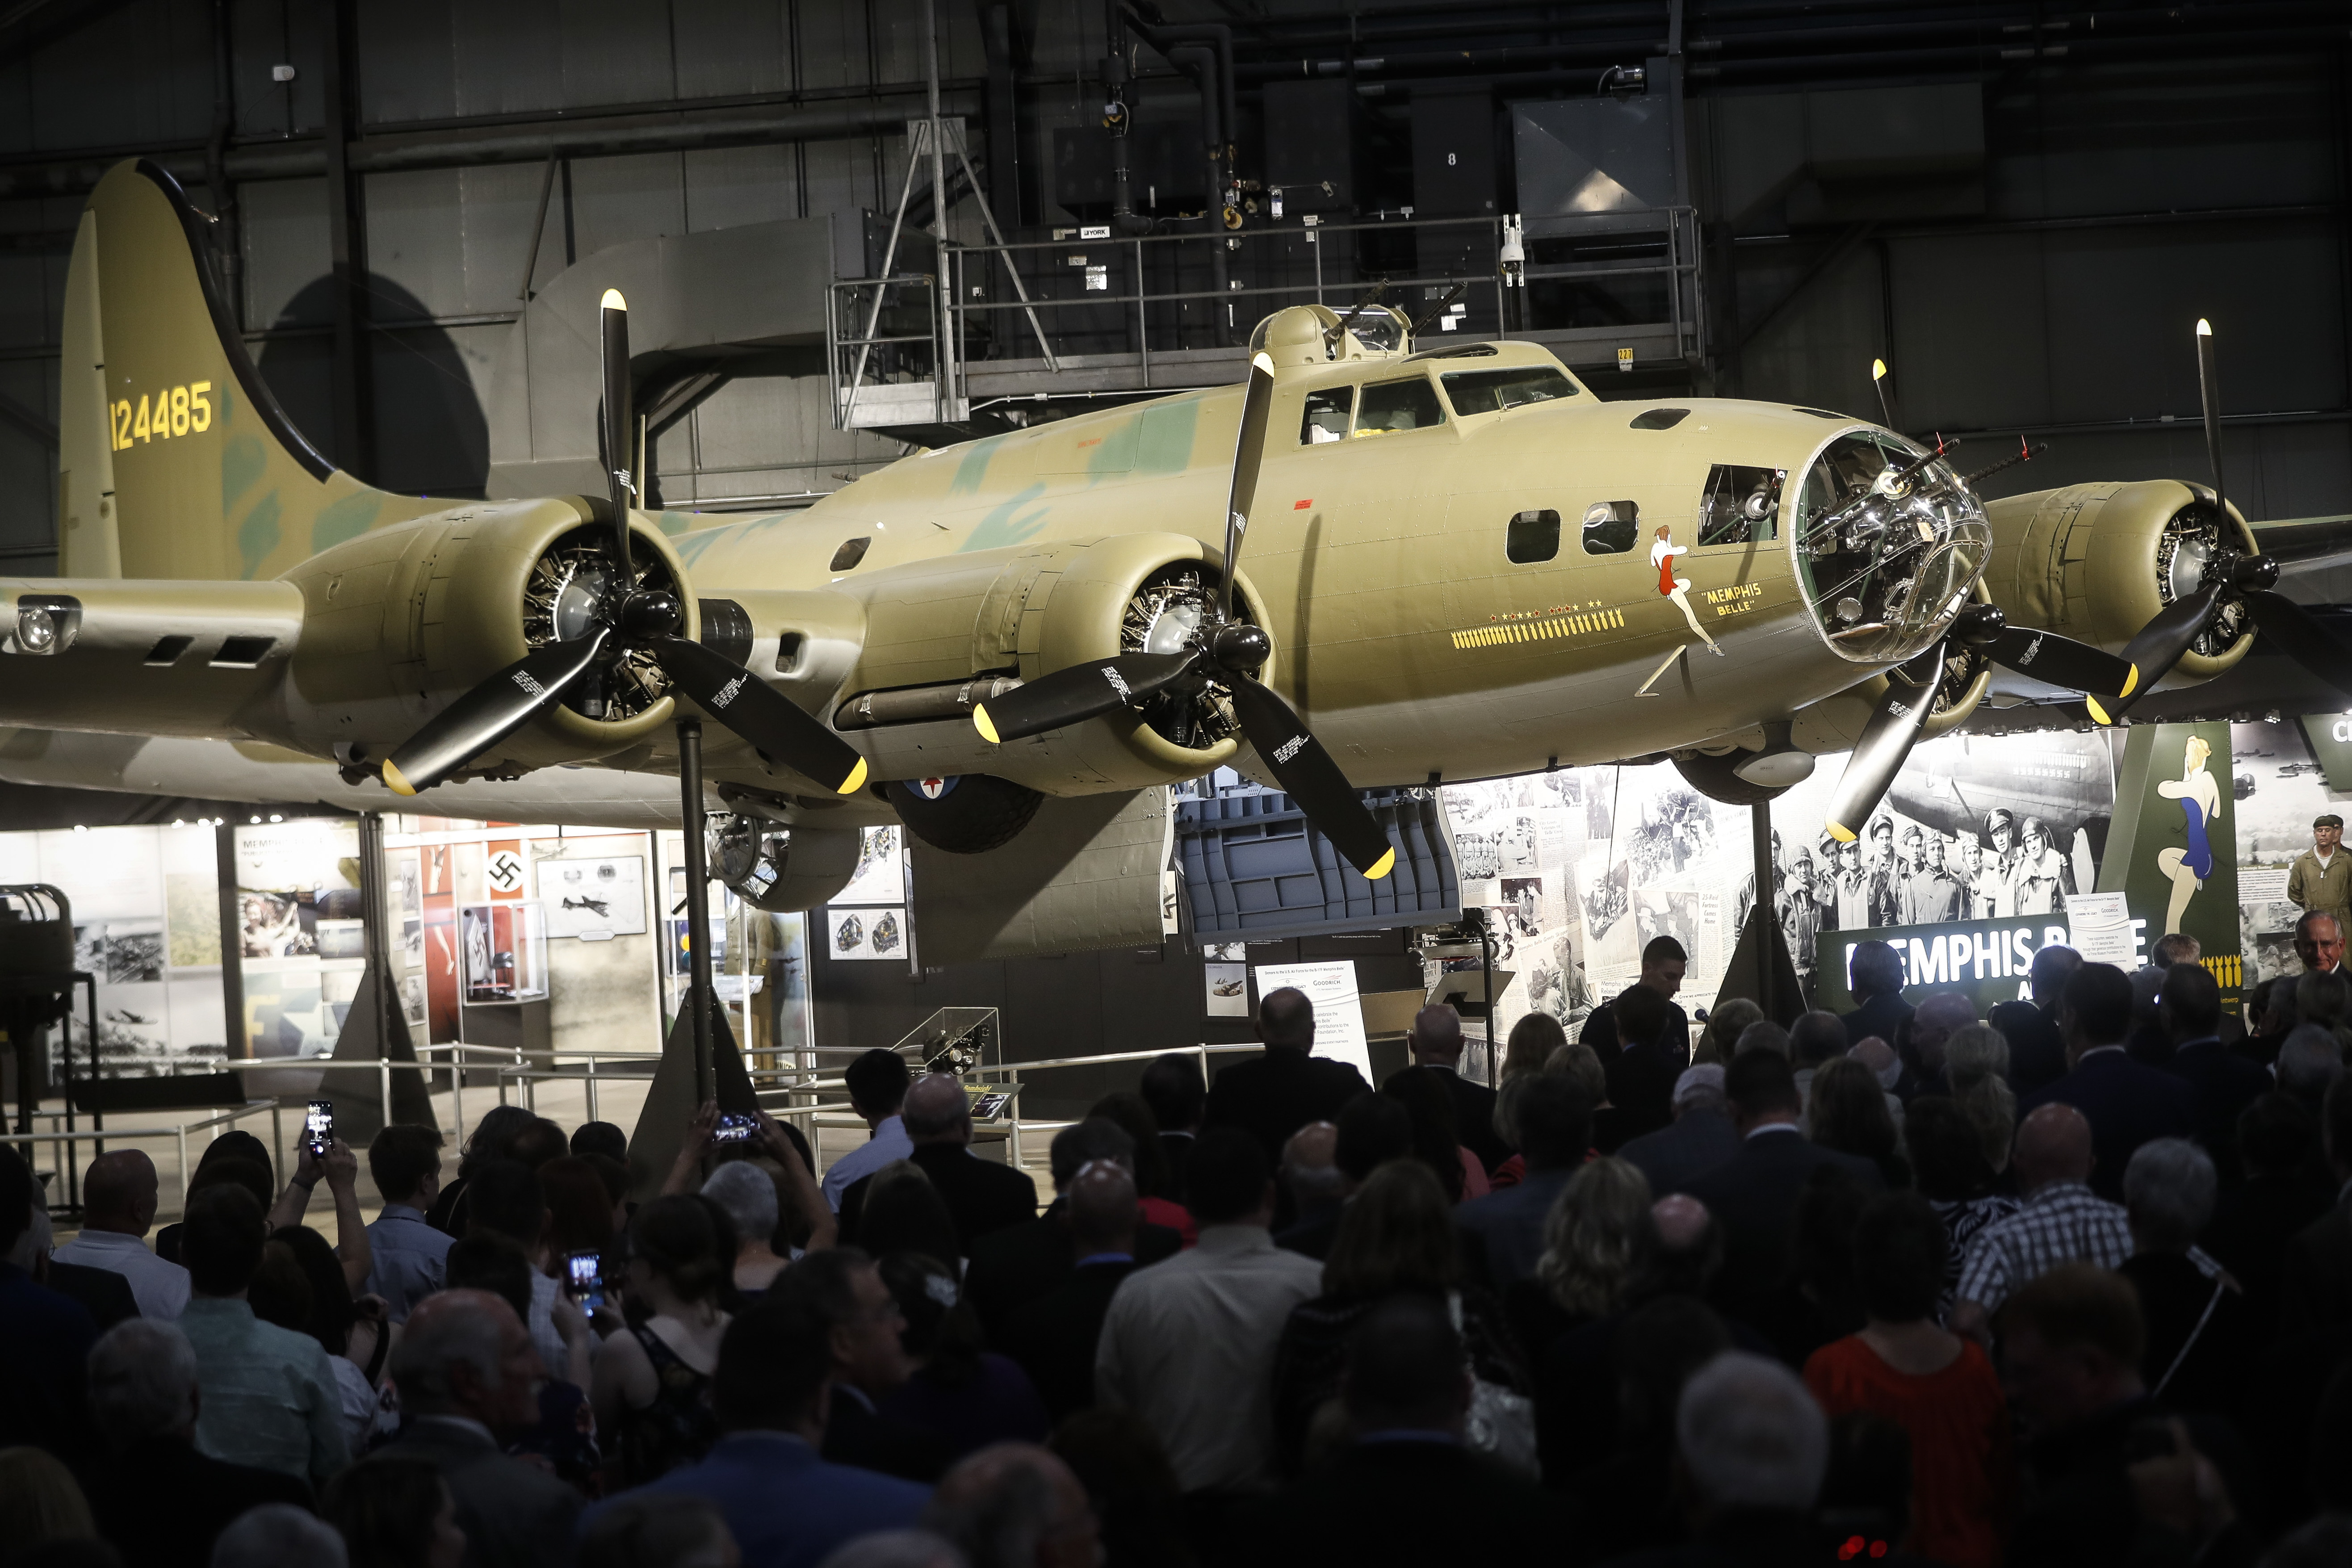 The plane was celebrated for being the first B-17 to survive 25 missions and return to the US (John Minchillo/AP)